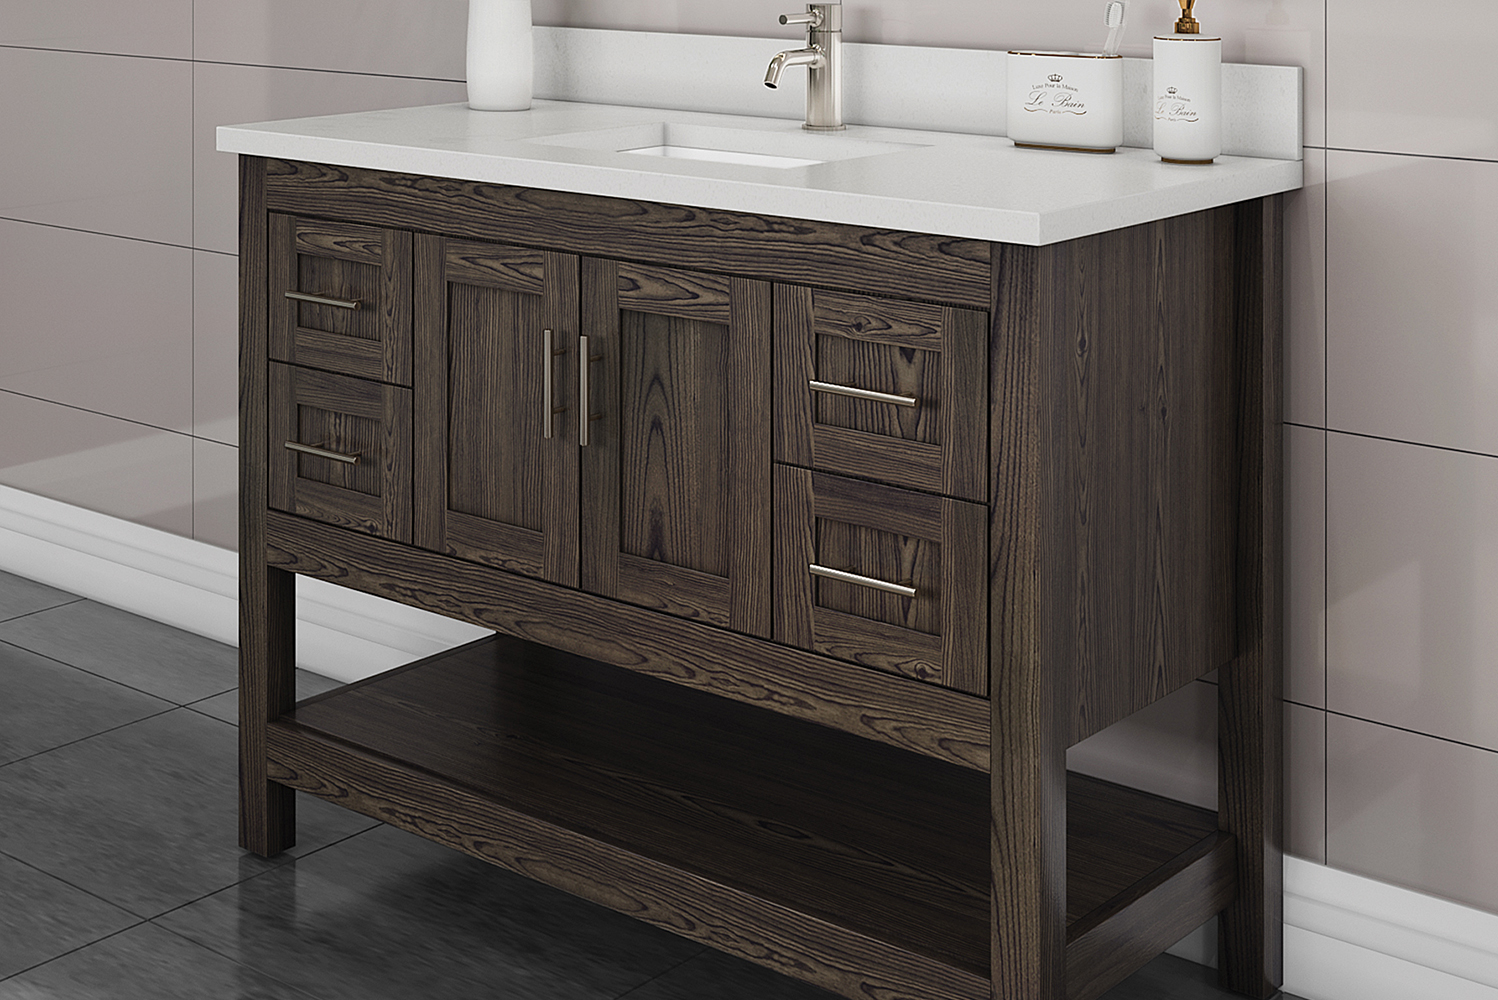 Strasser Woodenworks introduced Dusky Oak a rustic new finish for their handcrafted solid wood bathroom vanities 